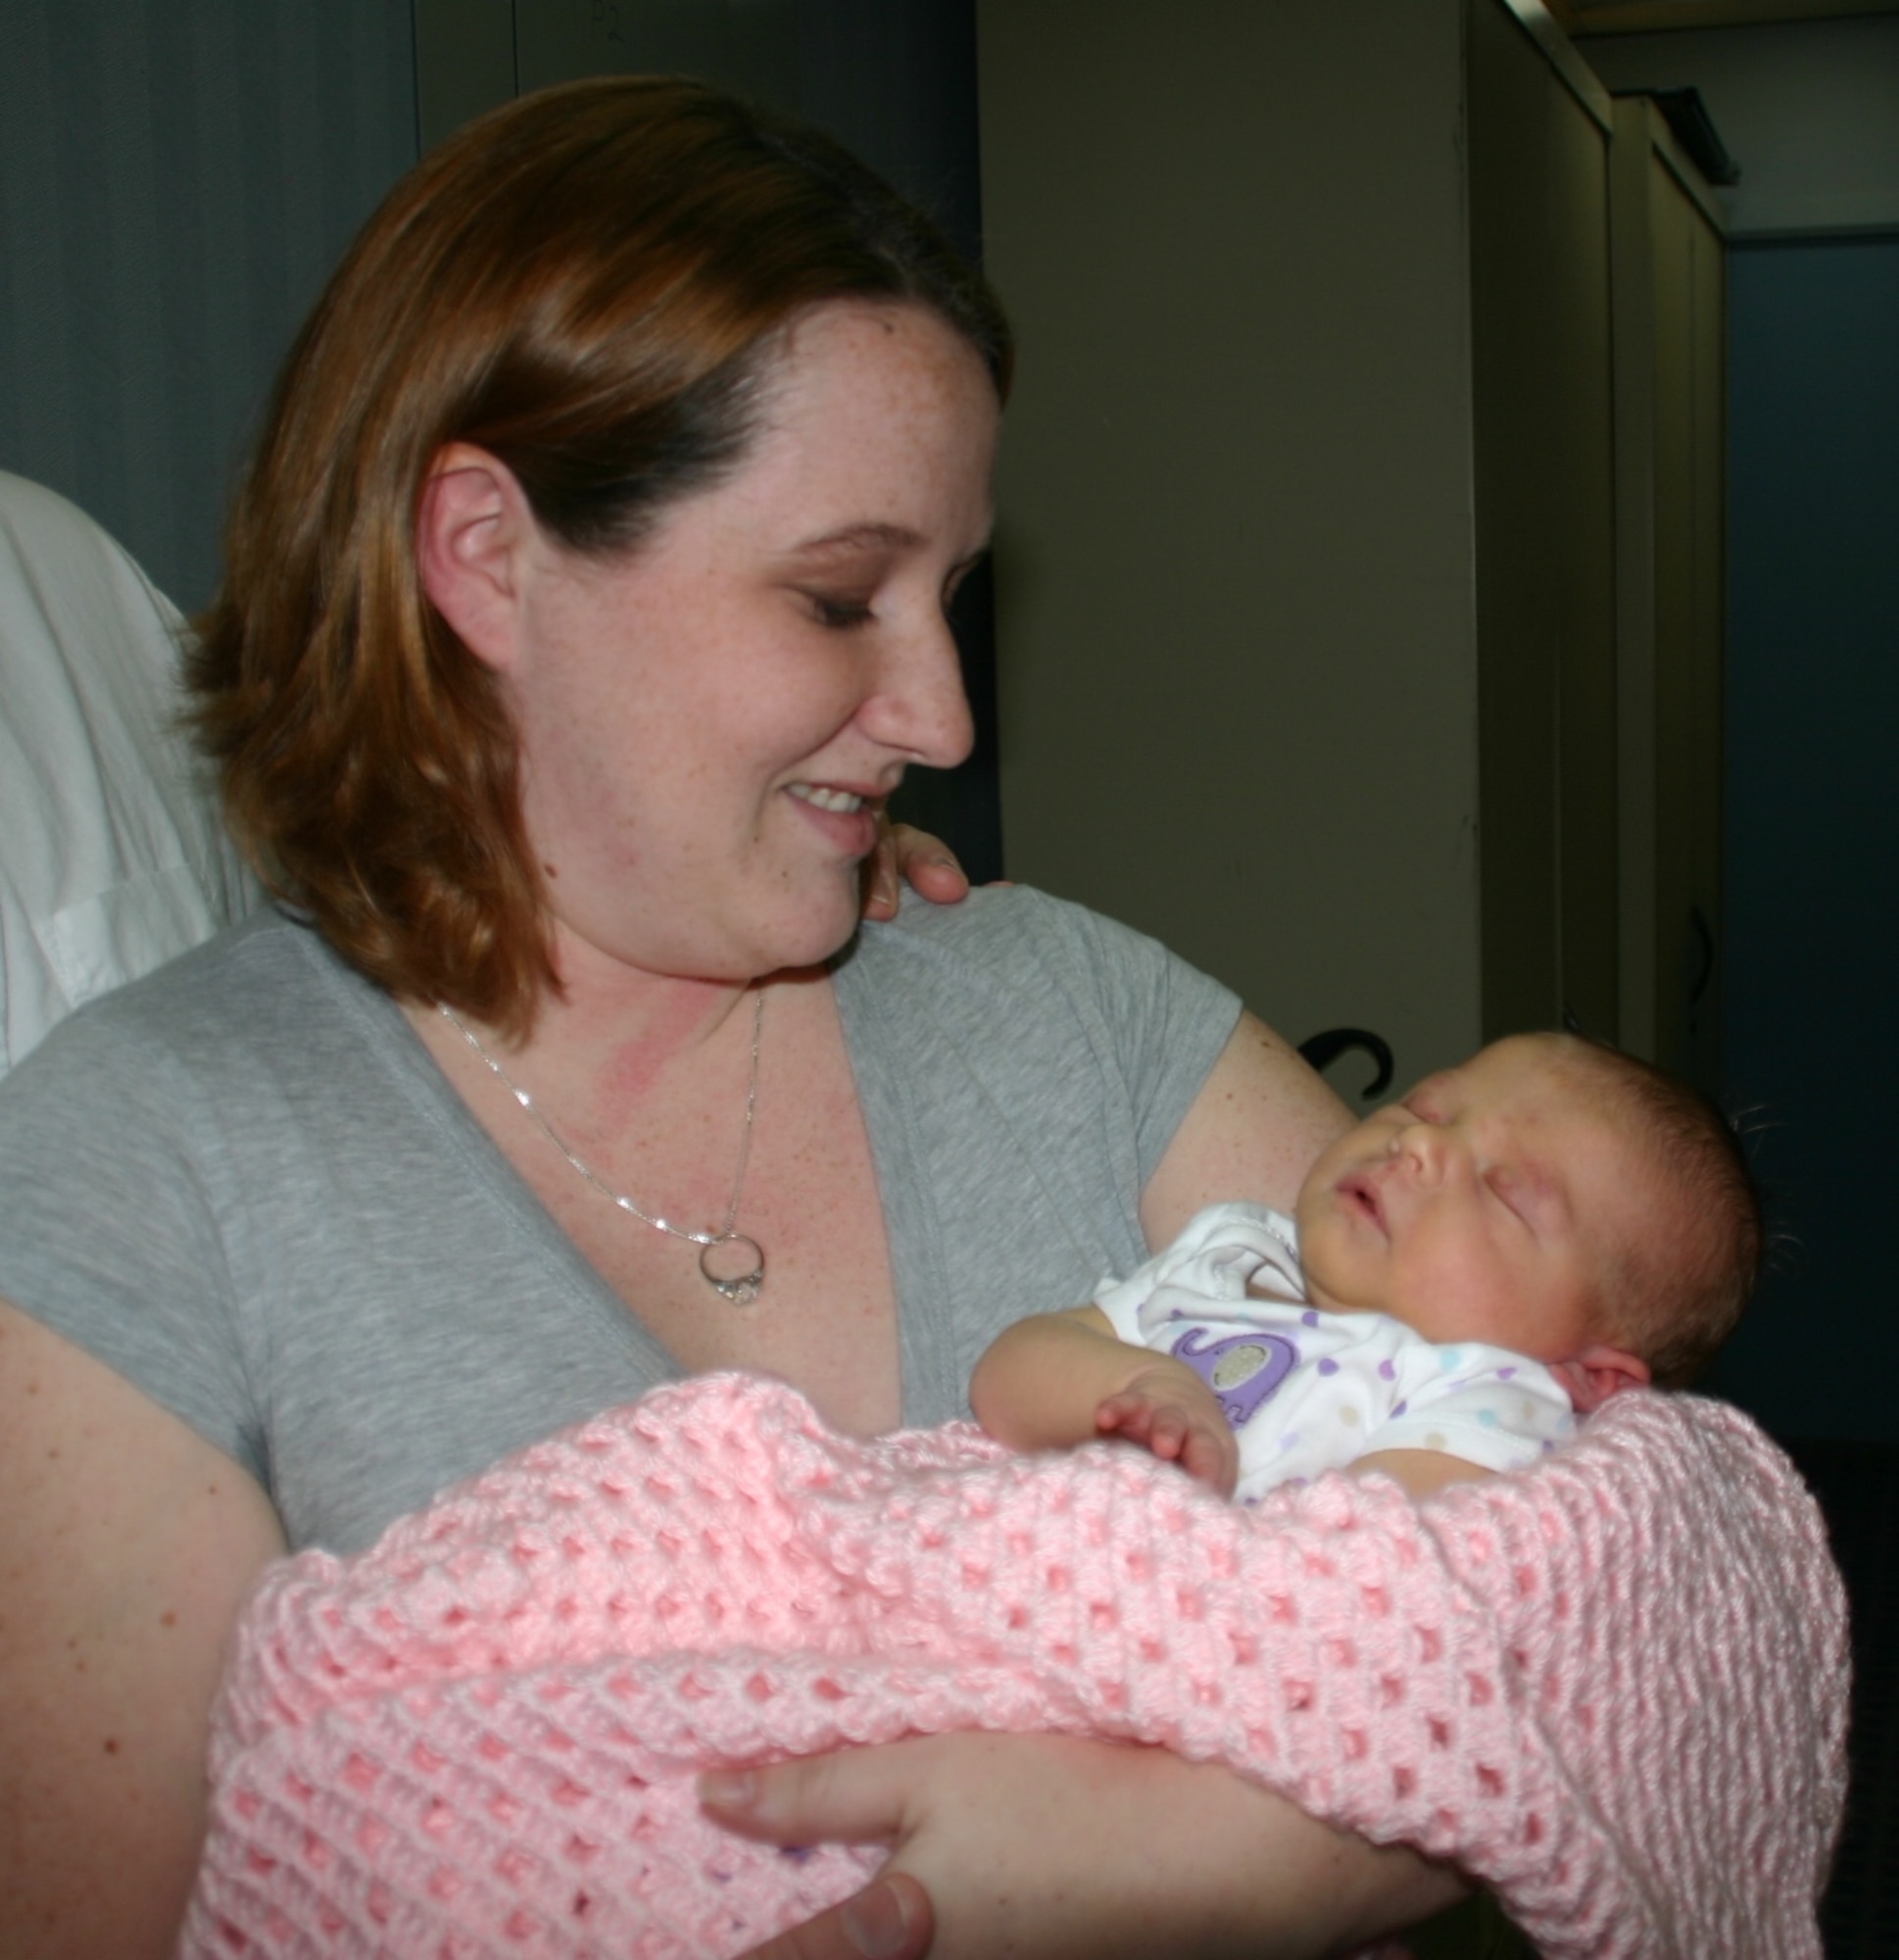 Senior Airman Stephanie Goeders, 552nd Air Control Networks Squadron, looks adoringly at her newborn baby, Emily Anne Goeders, the first baby born in 2009 in the Oklahoma City metro area. Photo courtesy of 1Lt Kinder Blacke.